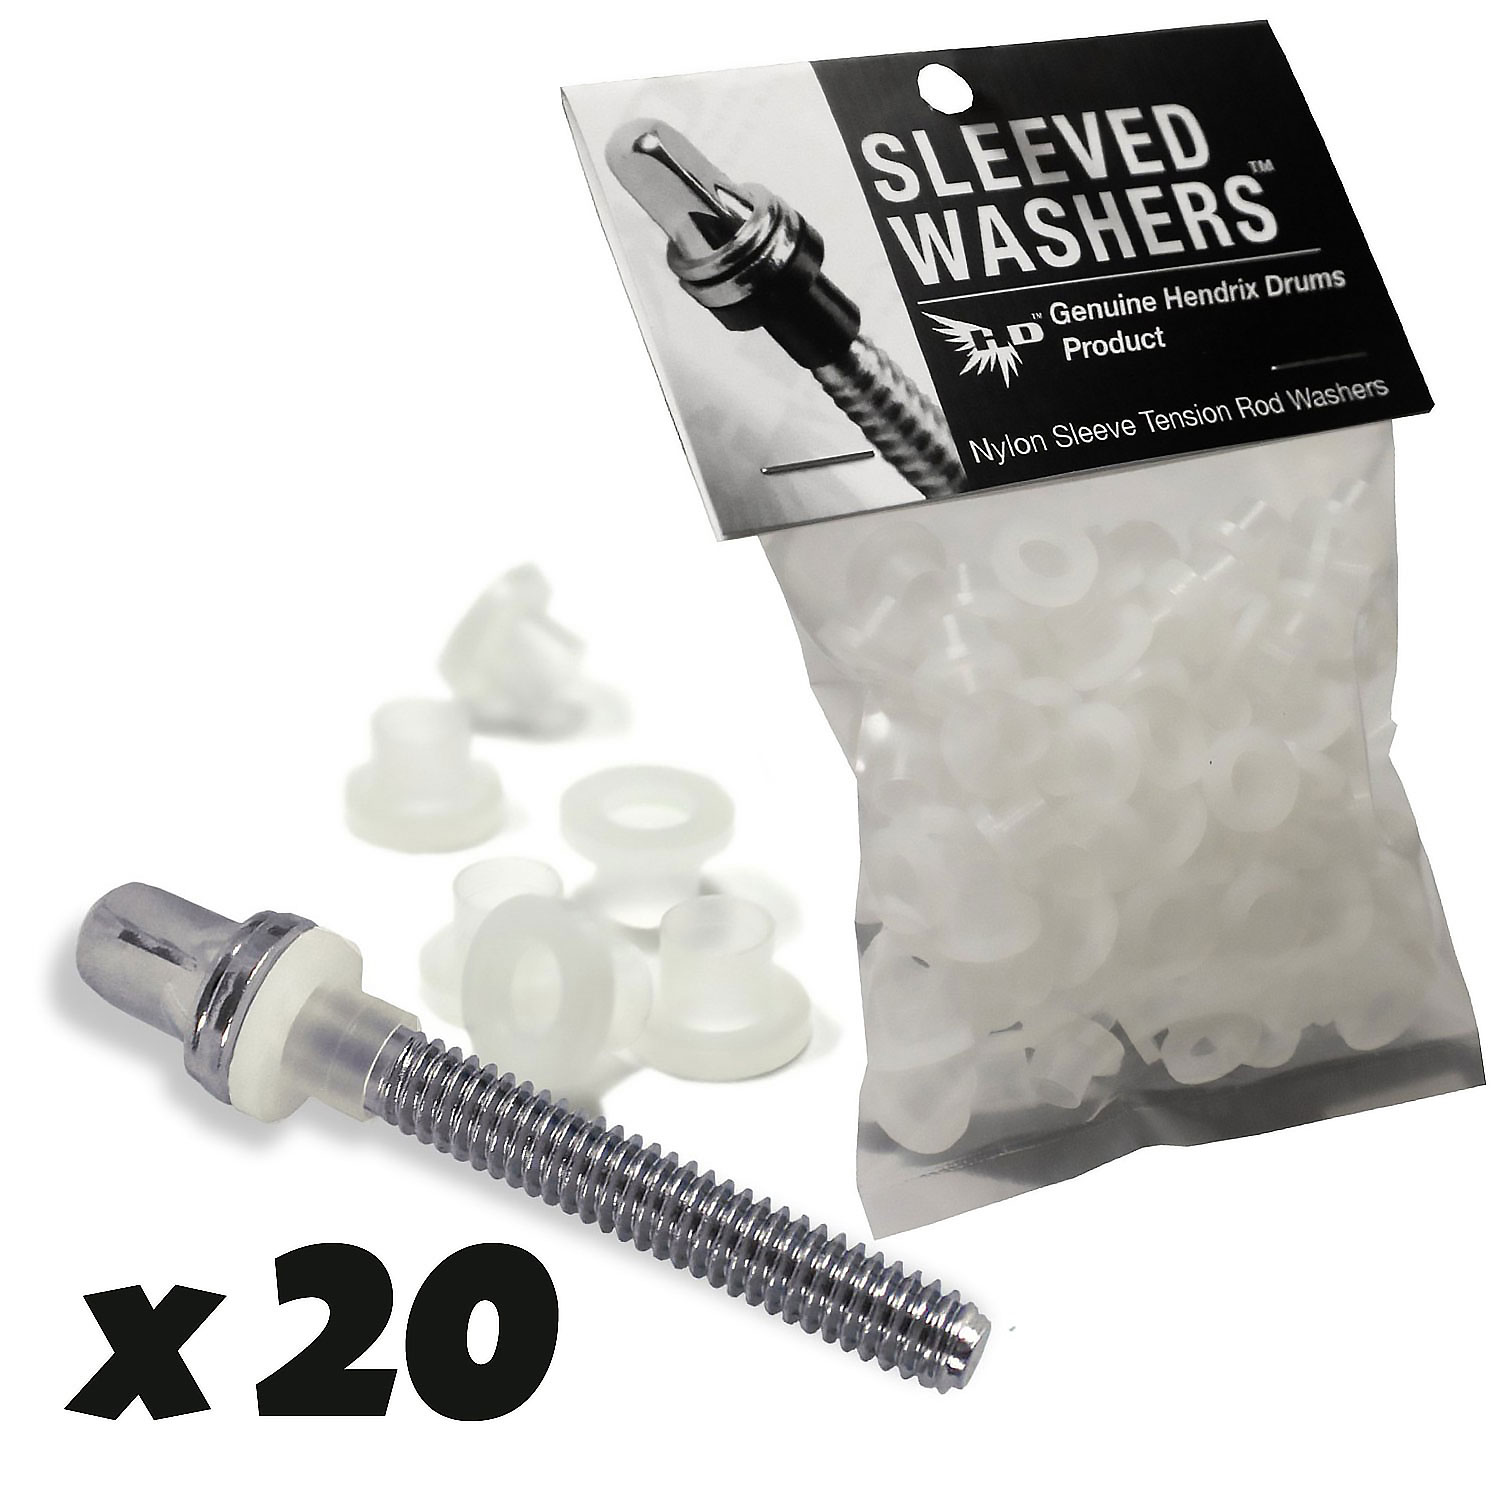 HENDRIX DRUMS SLEEVED WASHERS - WHITE (X20)